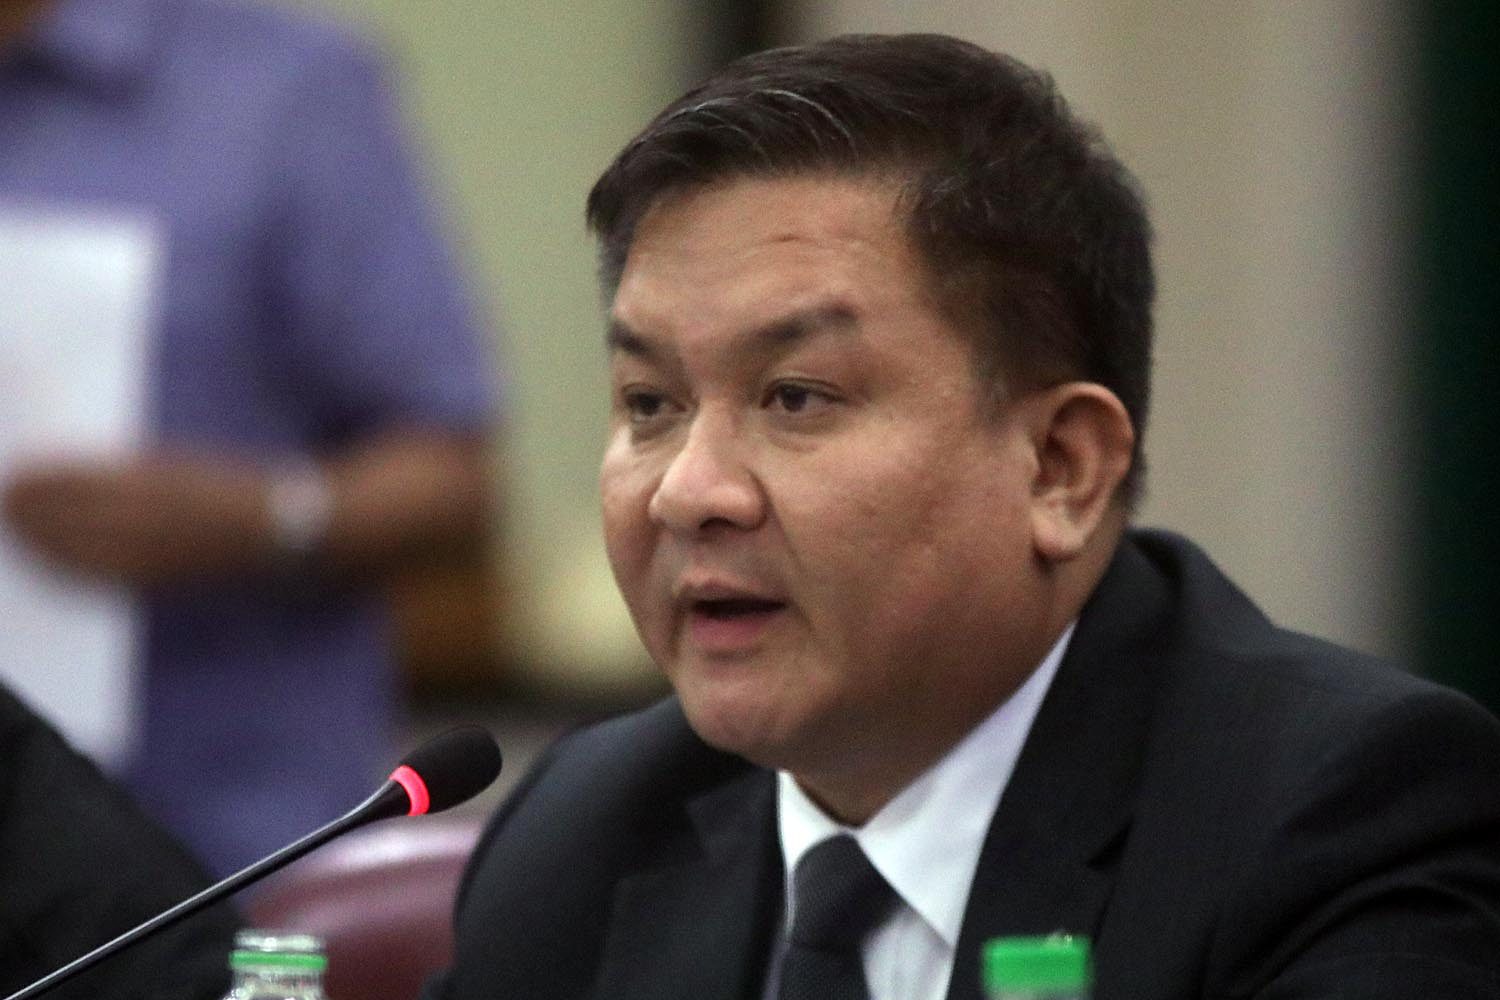 House panel OKs bill to lower age of criminal liability to 9 years old